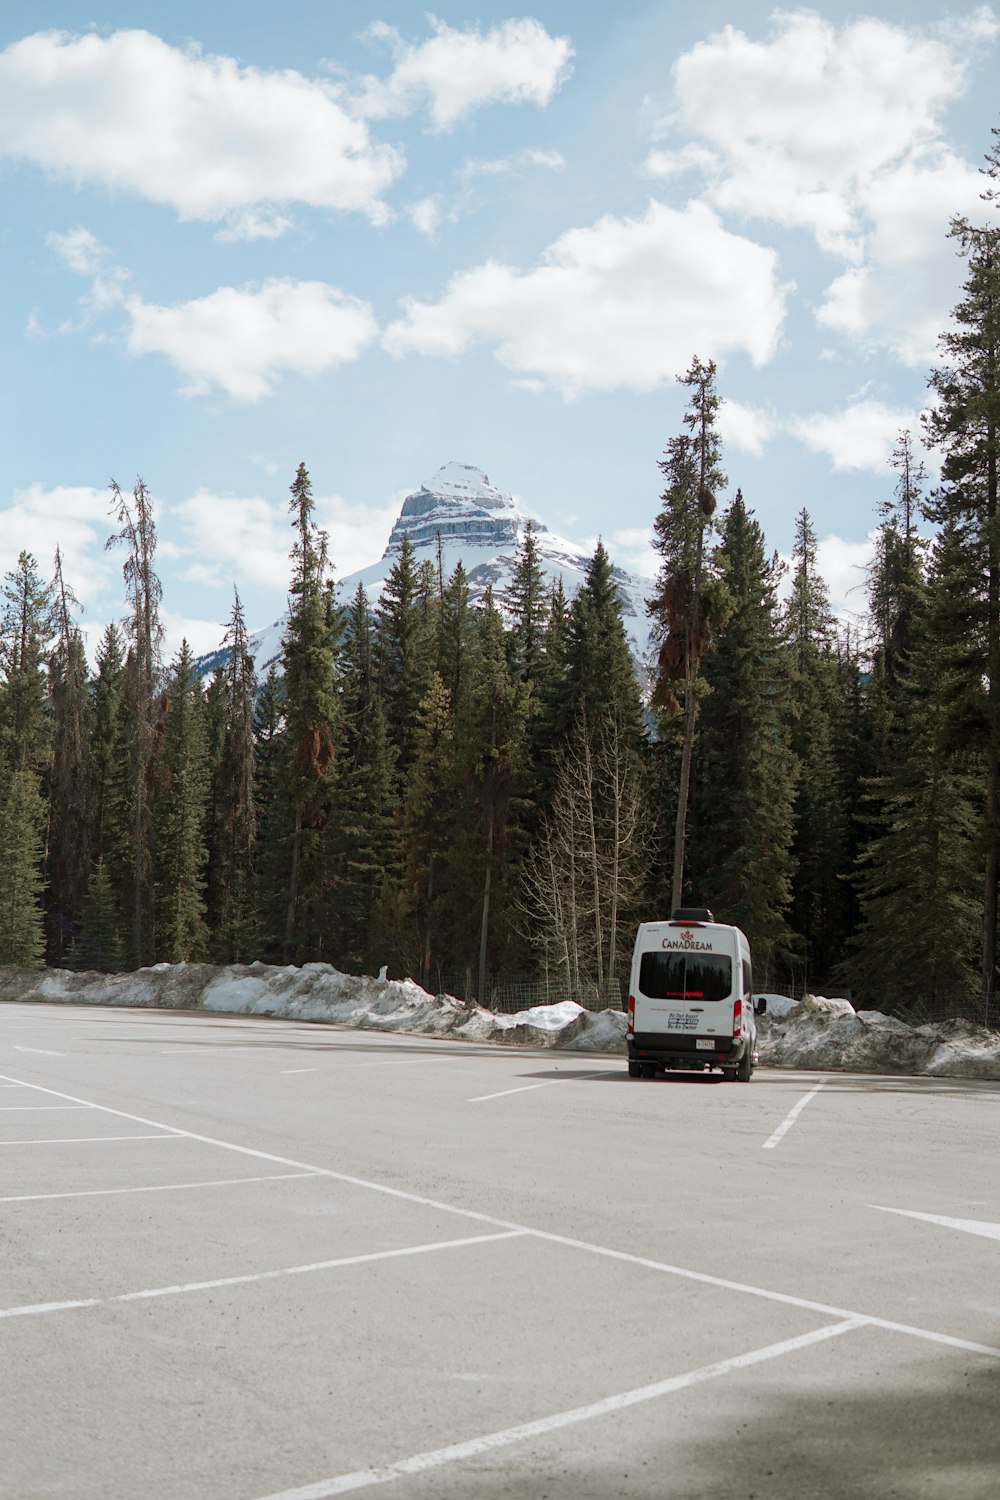 a bus driving on a road with trees and a mountain in the background